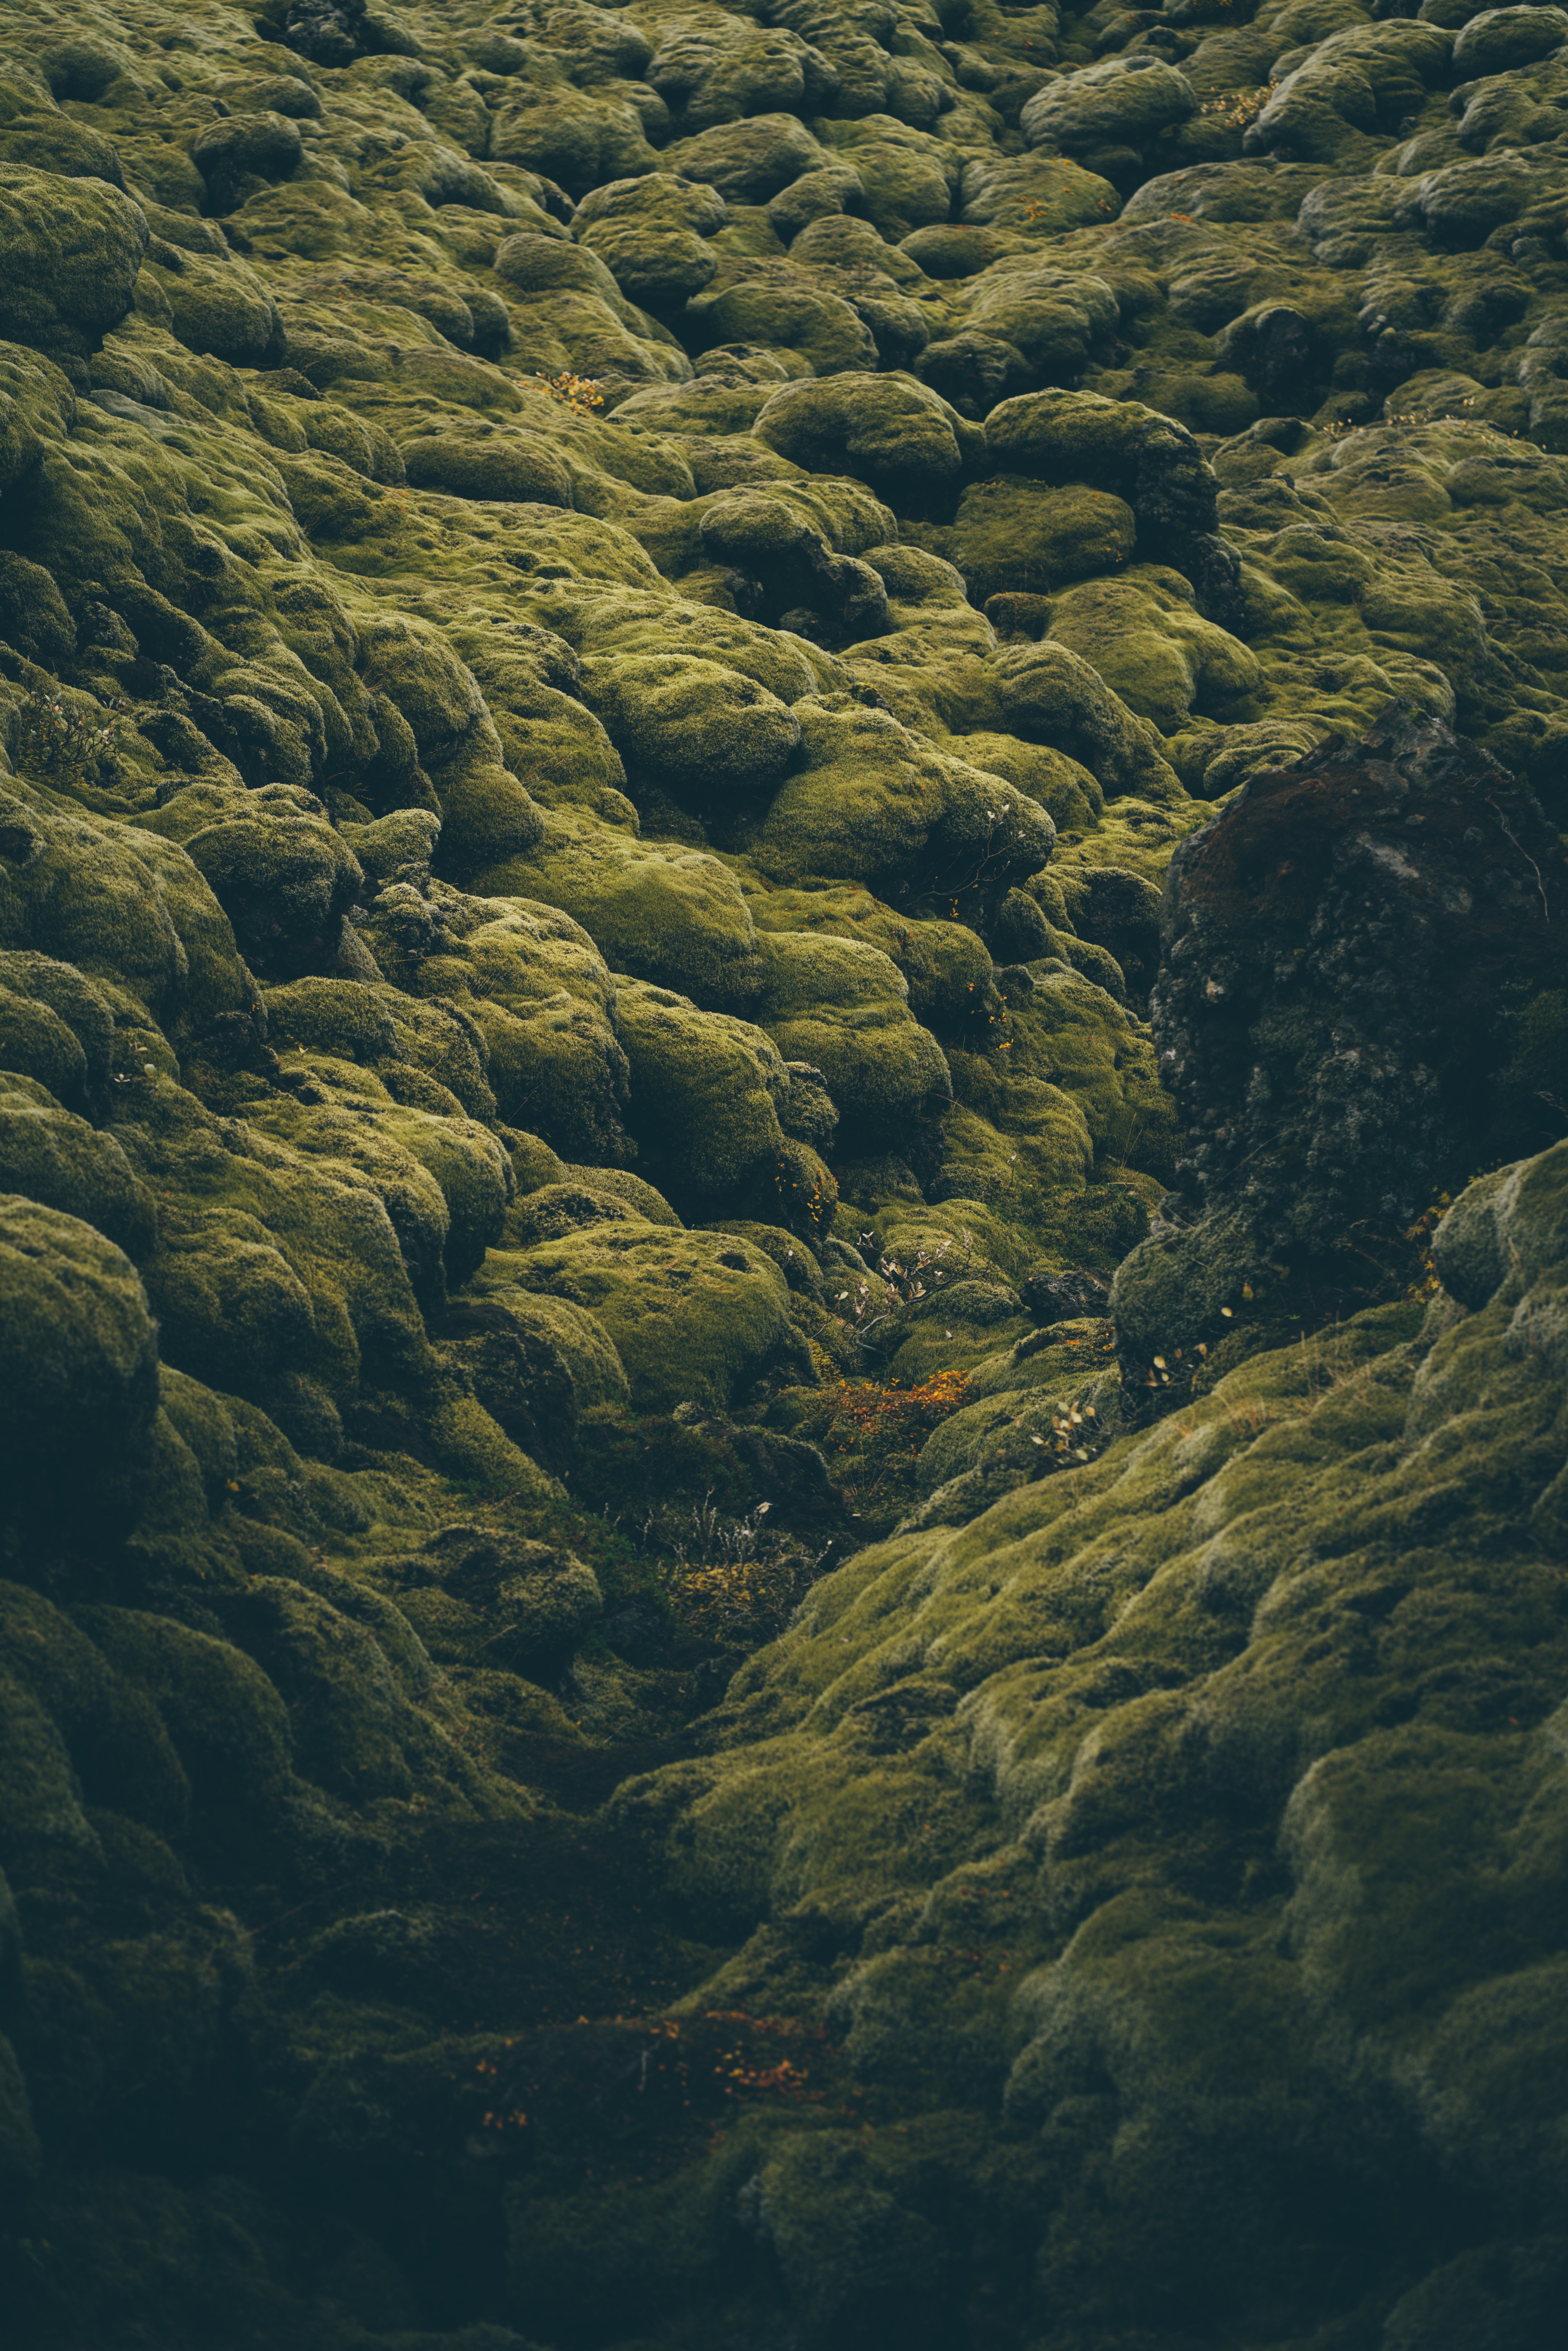 iceland, nature, stones, green, moss, coated, covered, pale